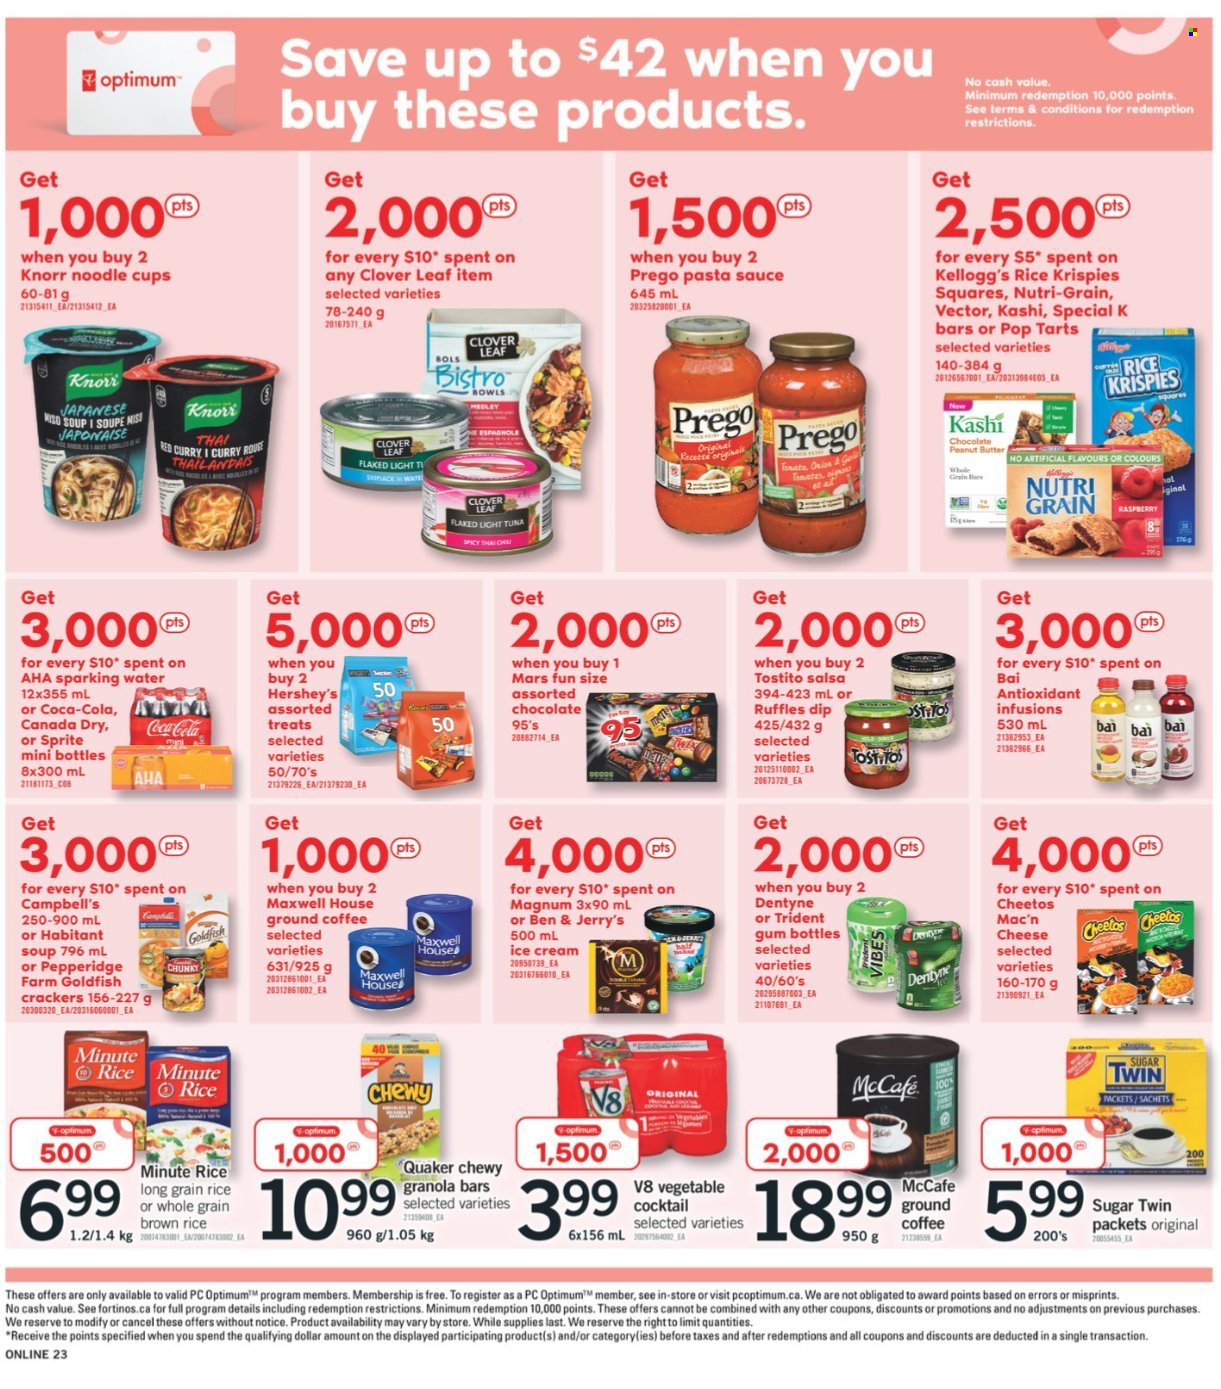 thumbnail - Fortinos Flyer - September 16, 2021 - September 22, 2021 - Sales products - tuna, Campbell's, pasta sauce, soup, sauce, Quaker, noodles, red curry, cheese, Clover, dip, Magnum, ice cream, Hershey's, Ben & Jerry's, Mars, crackers, Kellogg's, Trident, Pop-Tarts, Cheetos, Goldfish, Ruffles, sugar, light tuna, granola bar, Rice Krispies, Nutri-Grain, brown rice, long grain rice, miso, salsa, peanut butter, Canada Dry, Coca-Cola, Sprite, Bai, Maxwell House, coffee, ground coffee, McCafe, cup, Optimum, Knorr. Page 15.